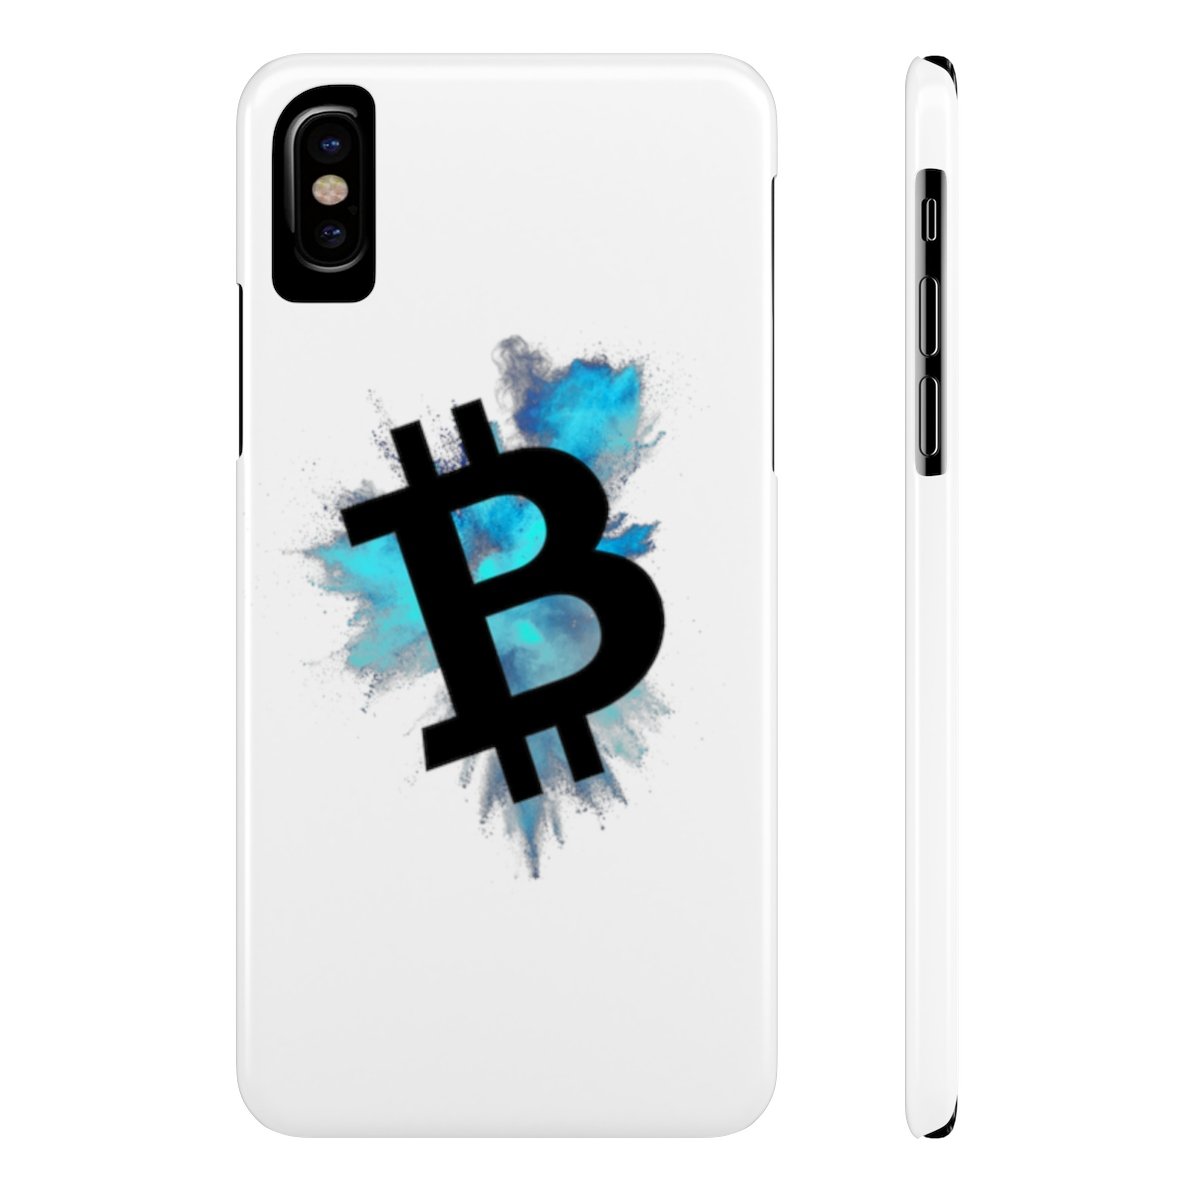 Bitcoin color cloud - Case Mate Slim Phone Case TCP1607 iPhone X Slim Official Crypto Merch